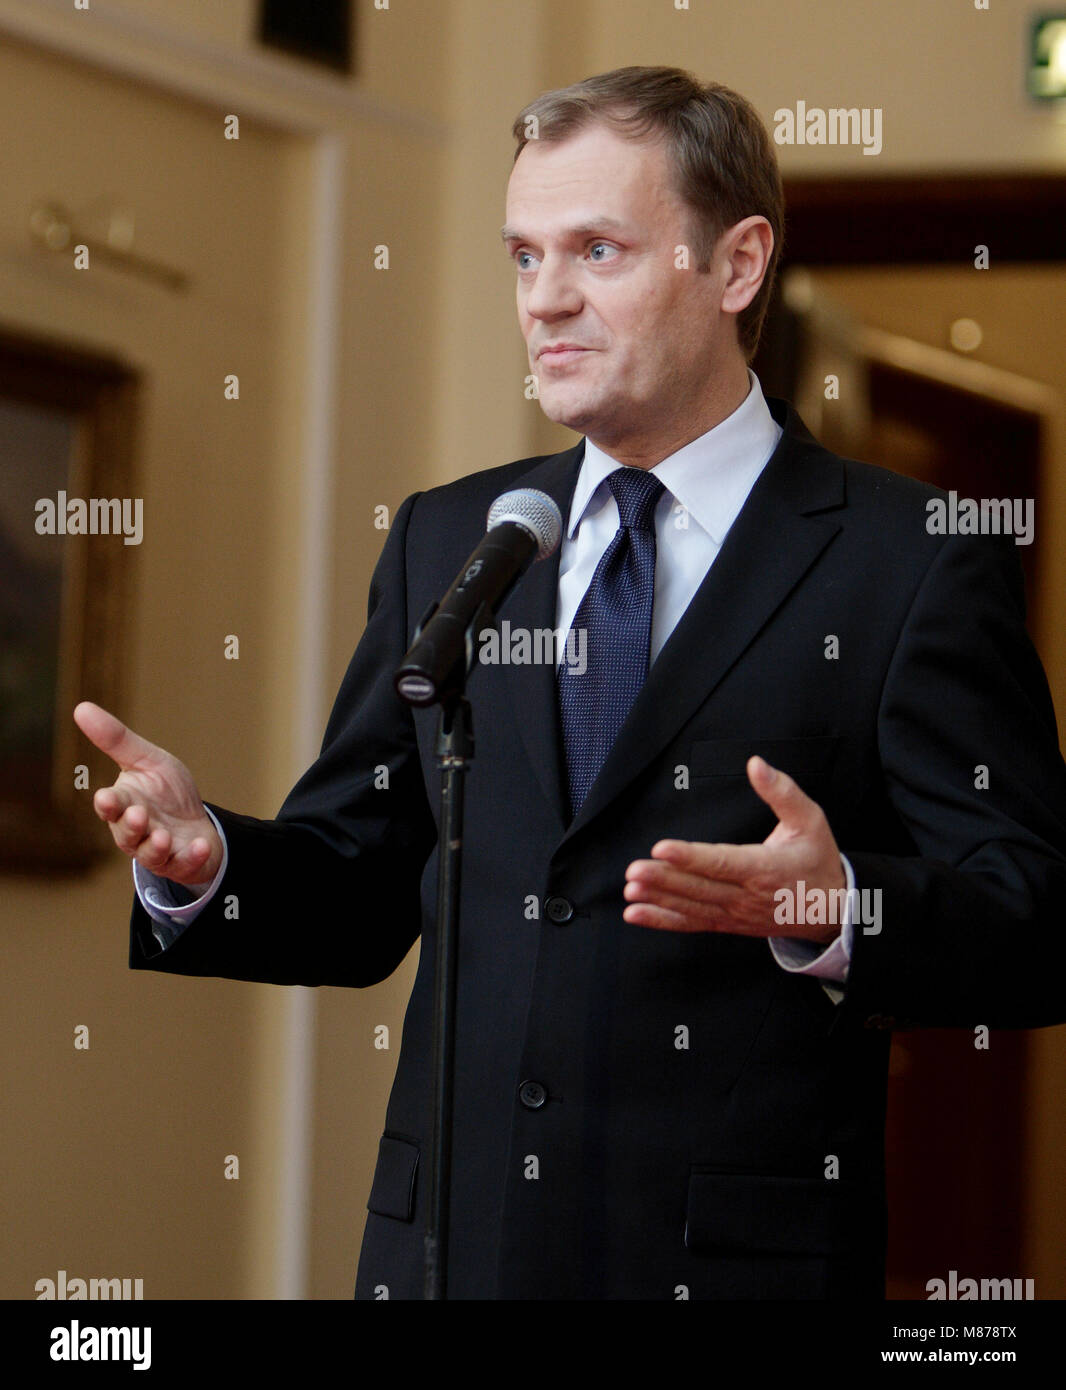 Warsaw, Masovia / Poland - 2007/11/27: Donald Tusk, Prime Minister of Poland and leader of Civic Platform party PO during a cabinet press briefing Stock Photo